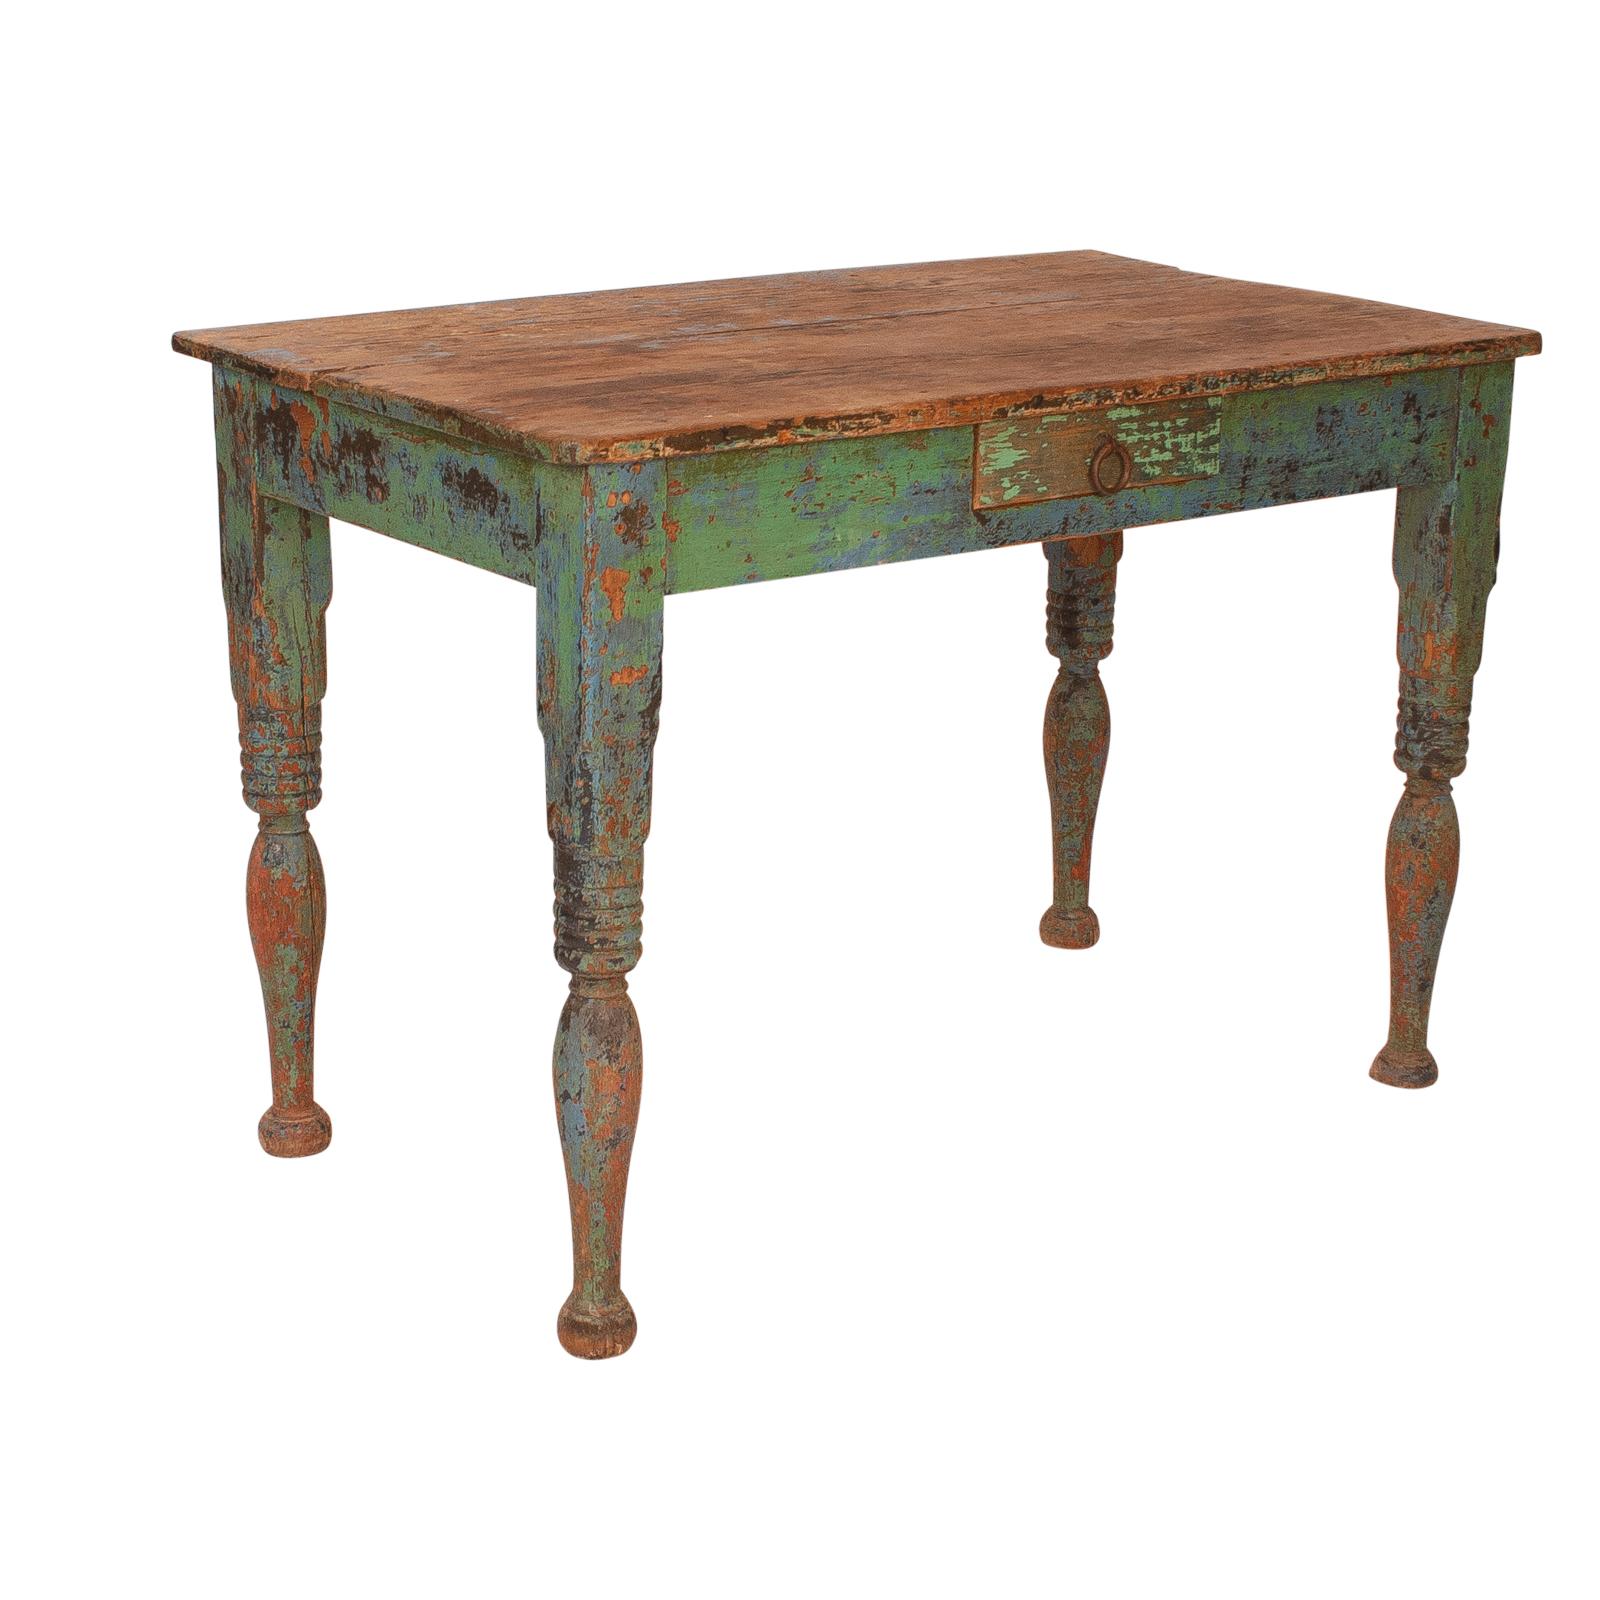 A late 19th century Spanish Colonial green painted pine work table, with one drawer, circa 1880.